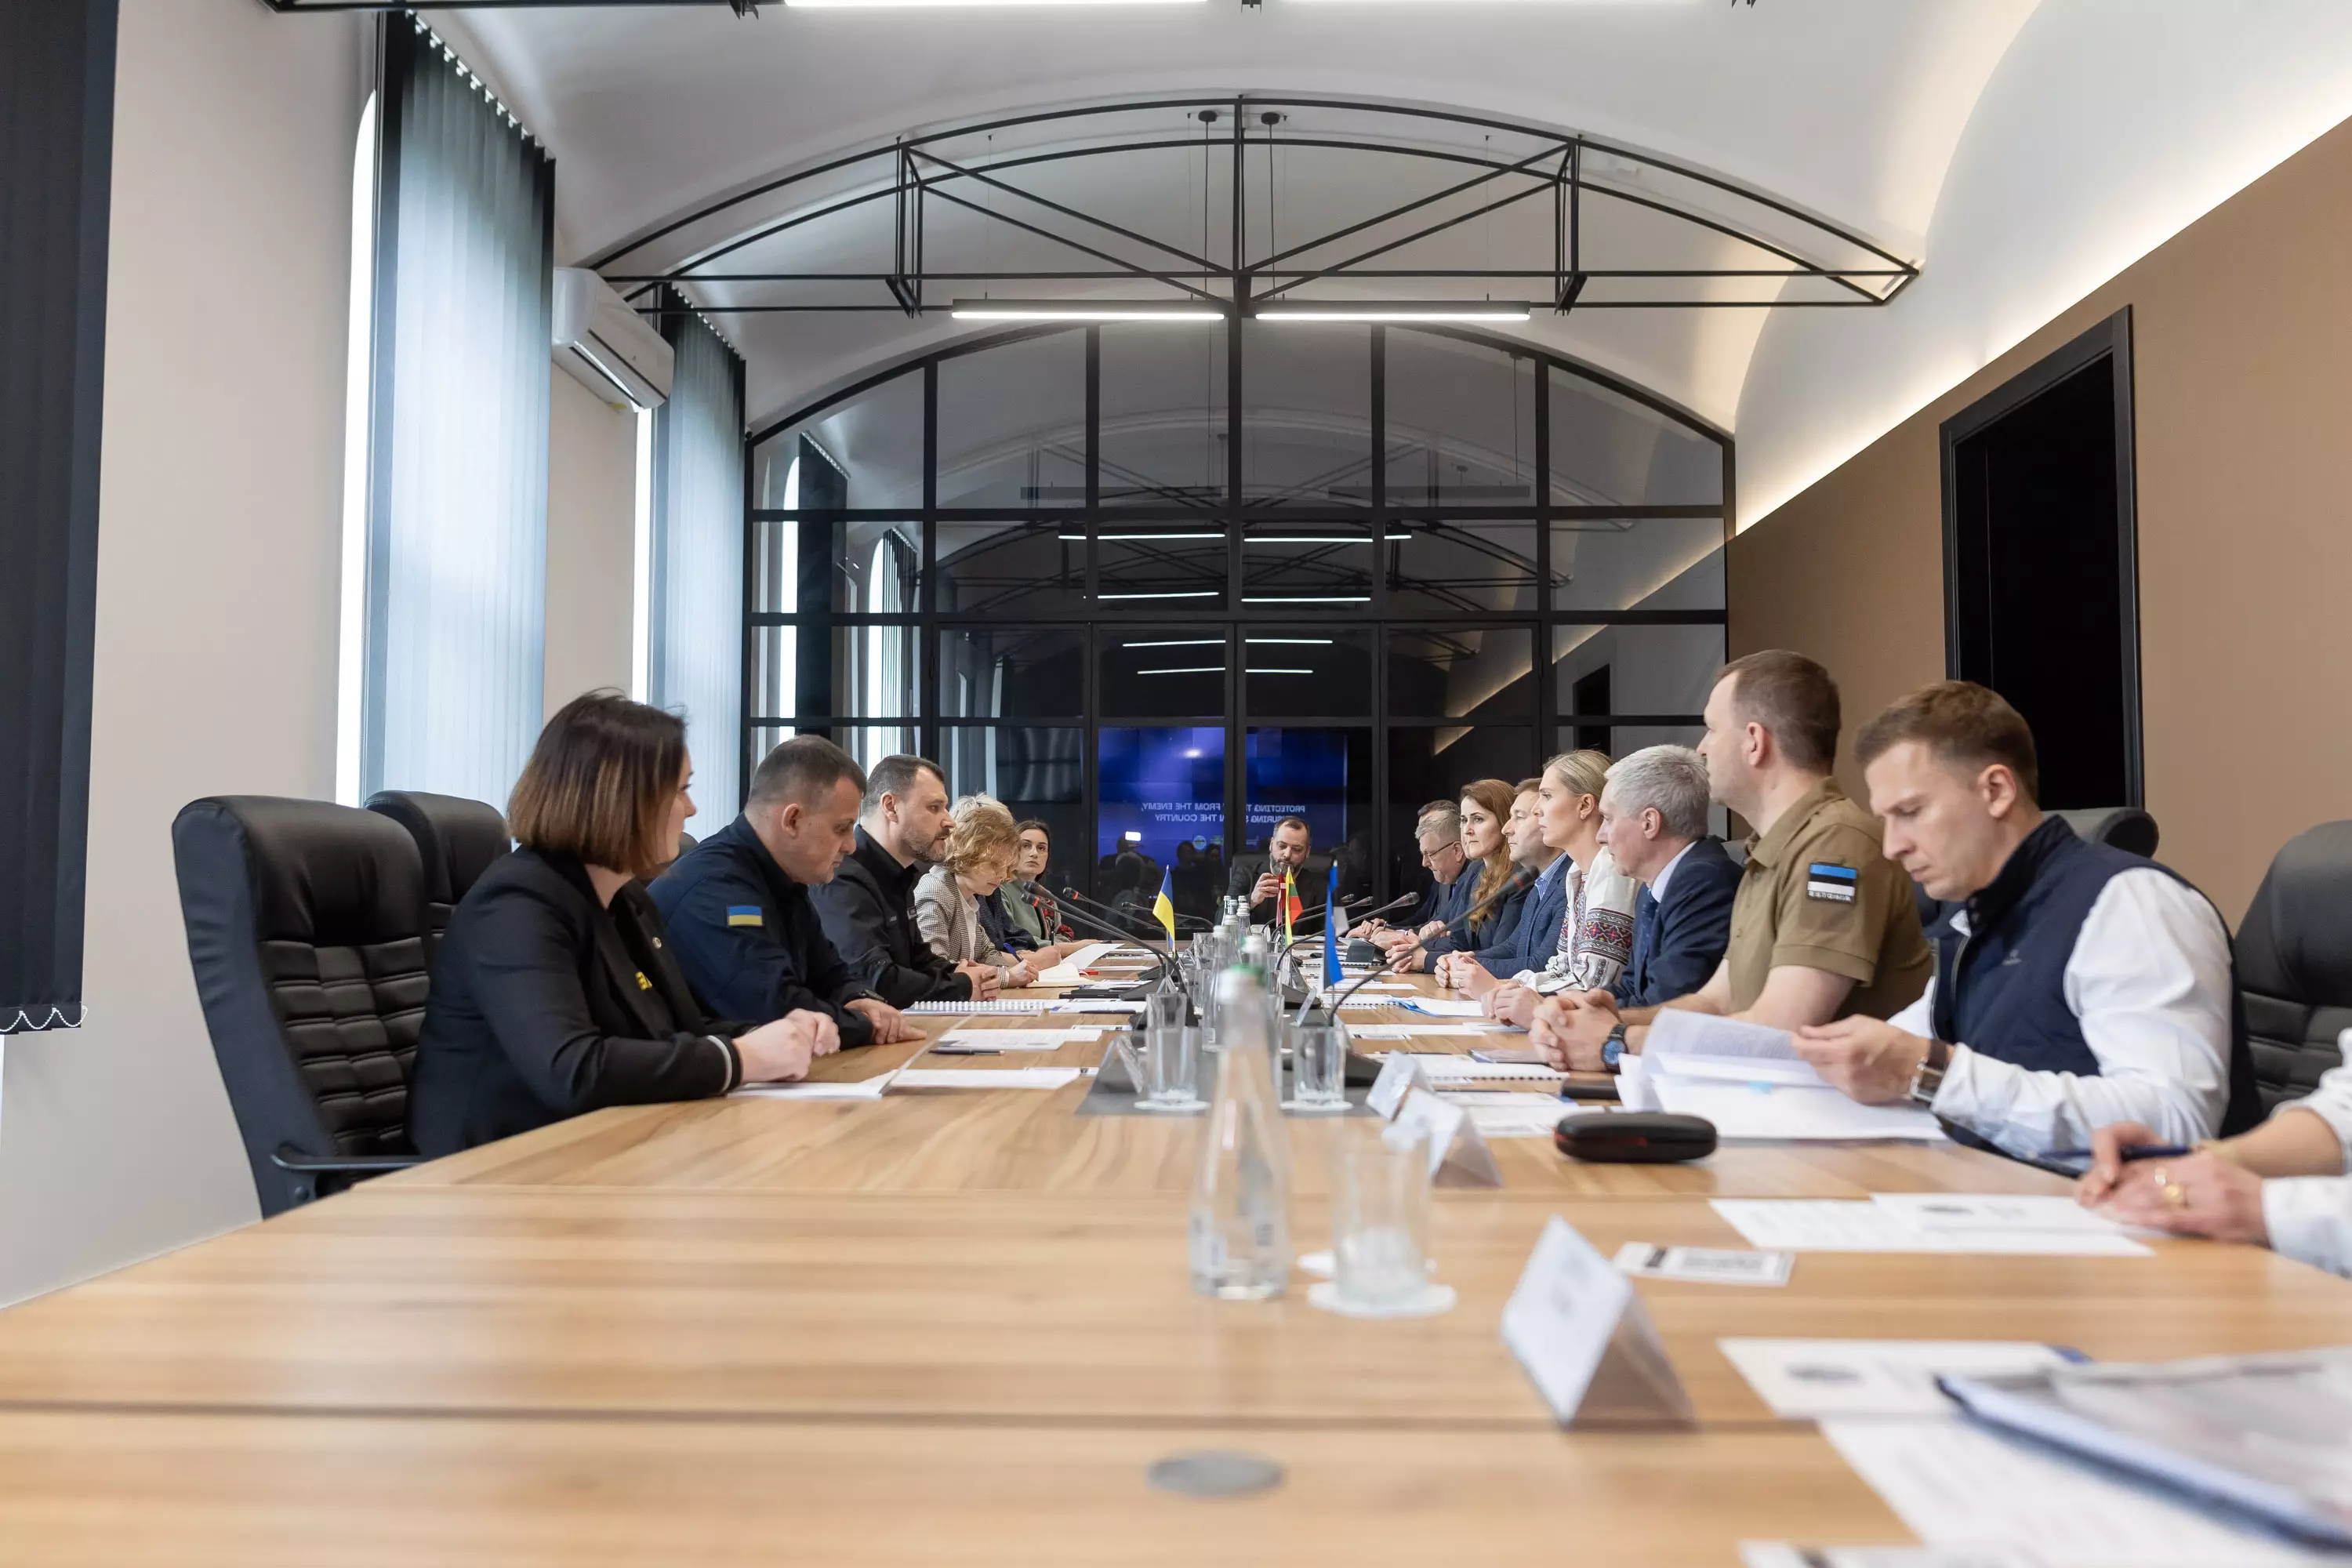 Ihor Klymenko met with the Heads of the Ministry of Internal Affairs of the Baltic countries - Estonia, Lithuania and Latvia